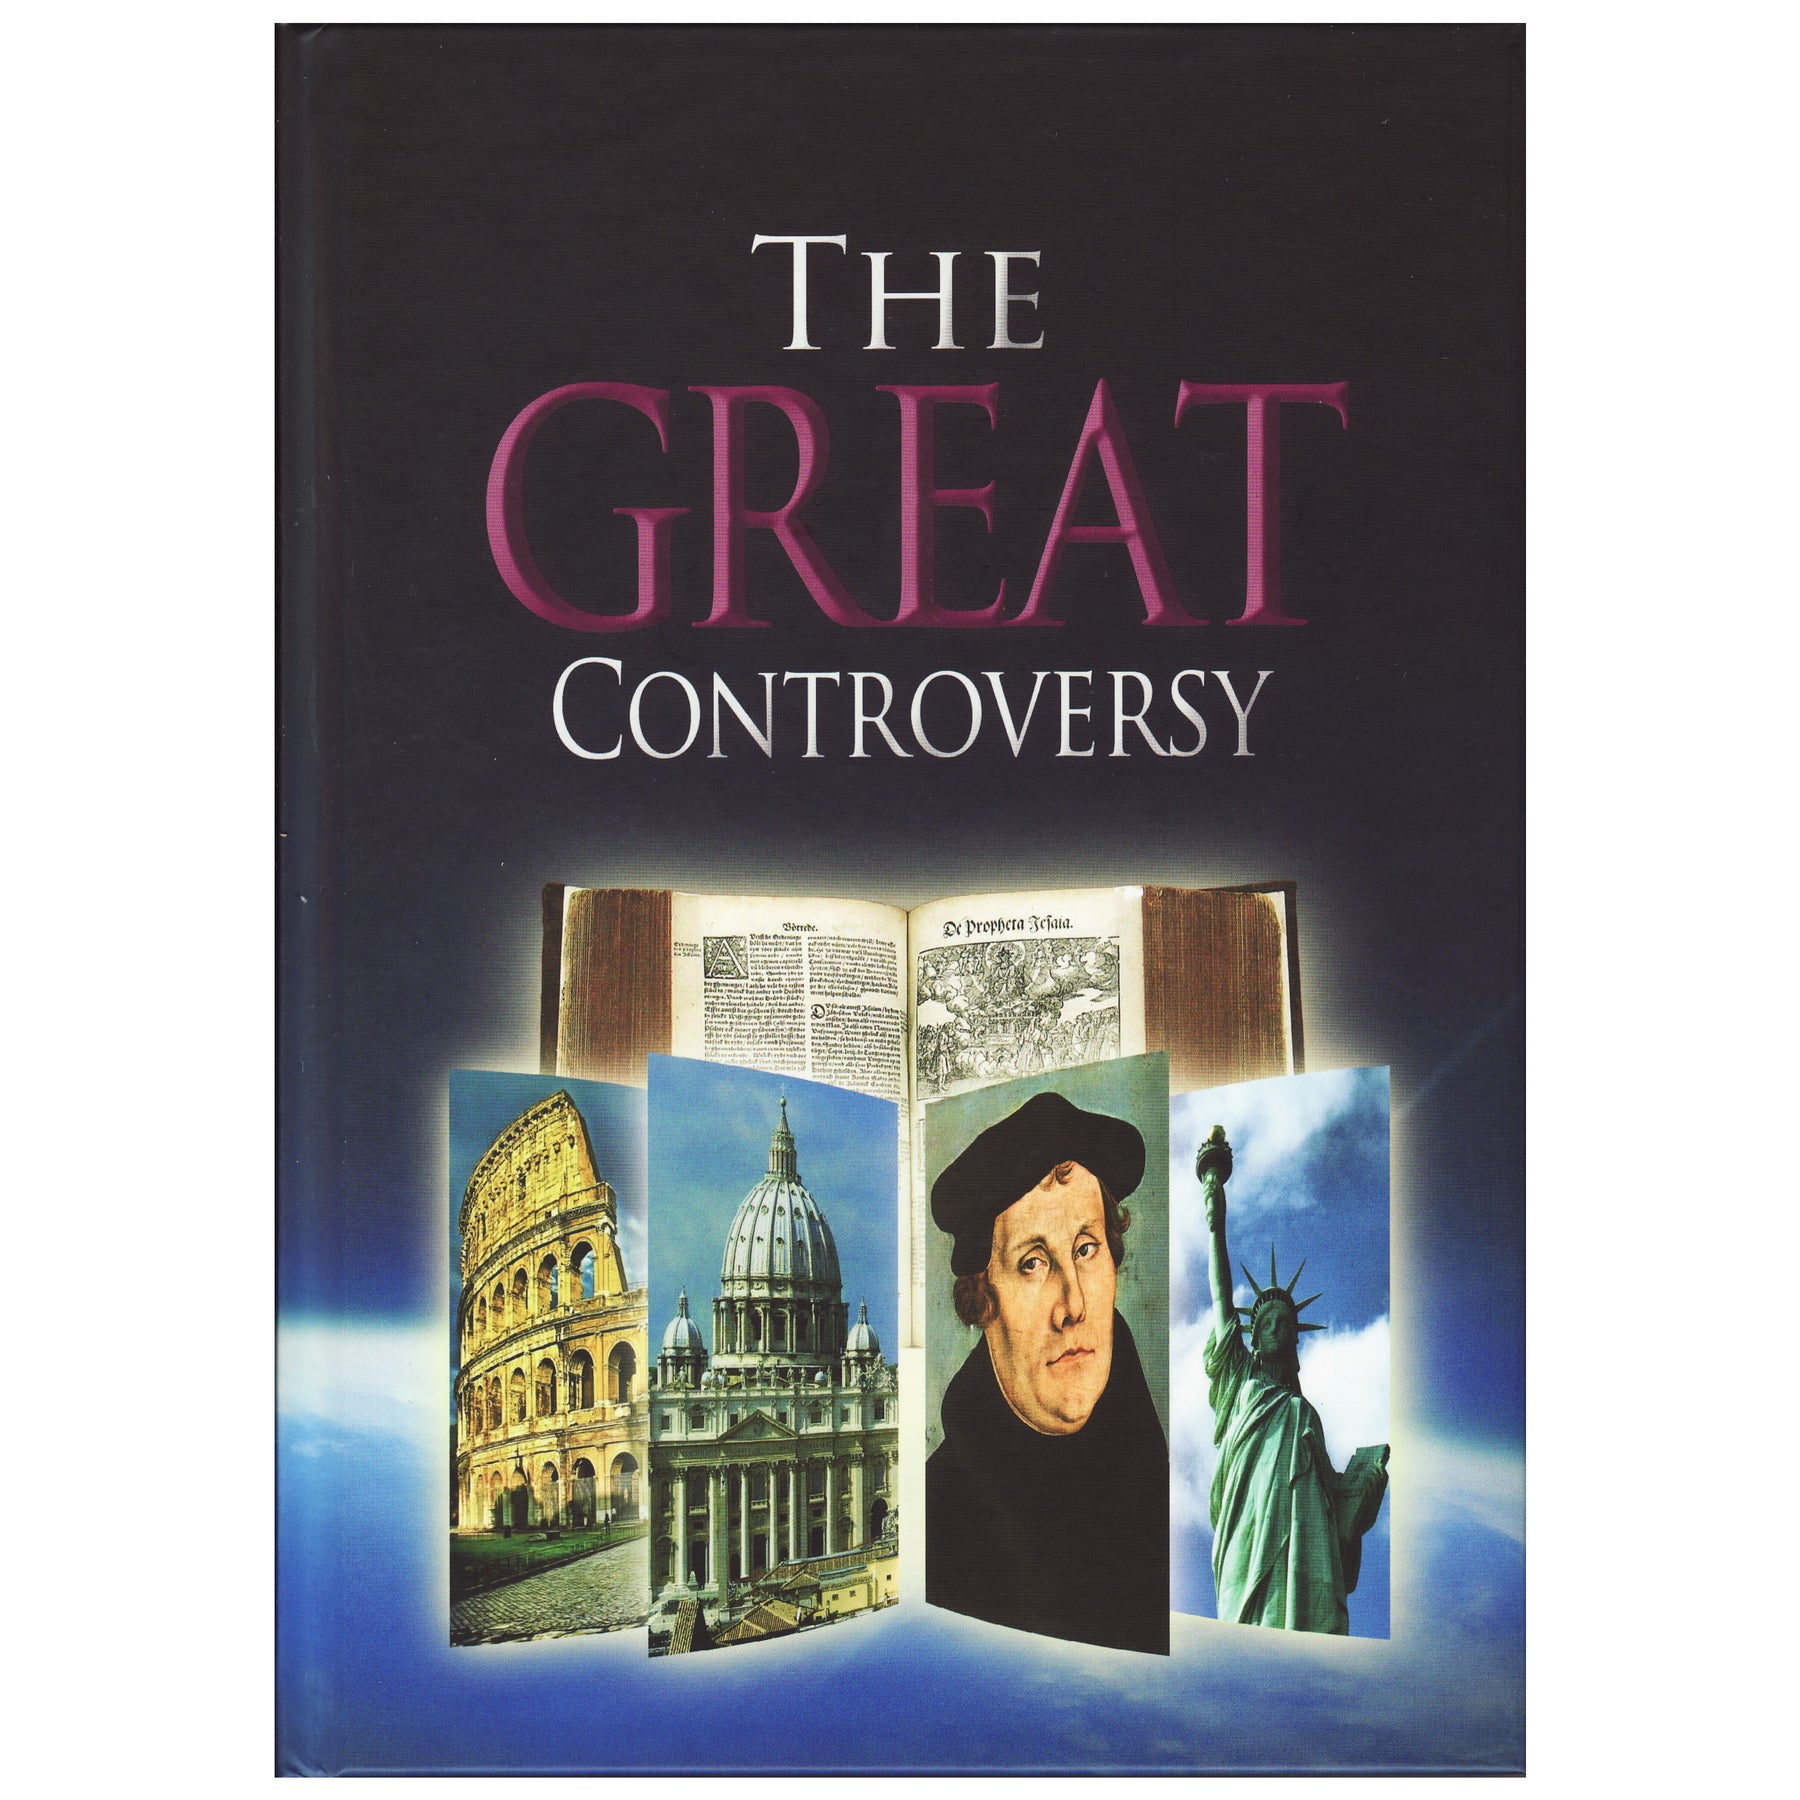 Illustrated The Great Controversy (Hardcover) by Ellen White